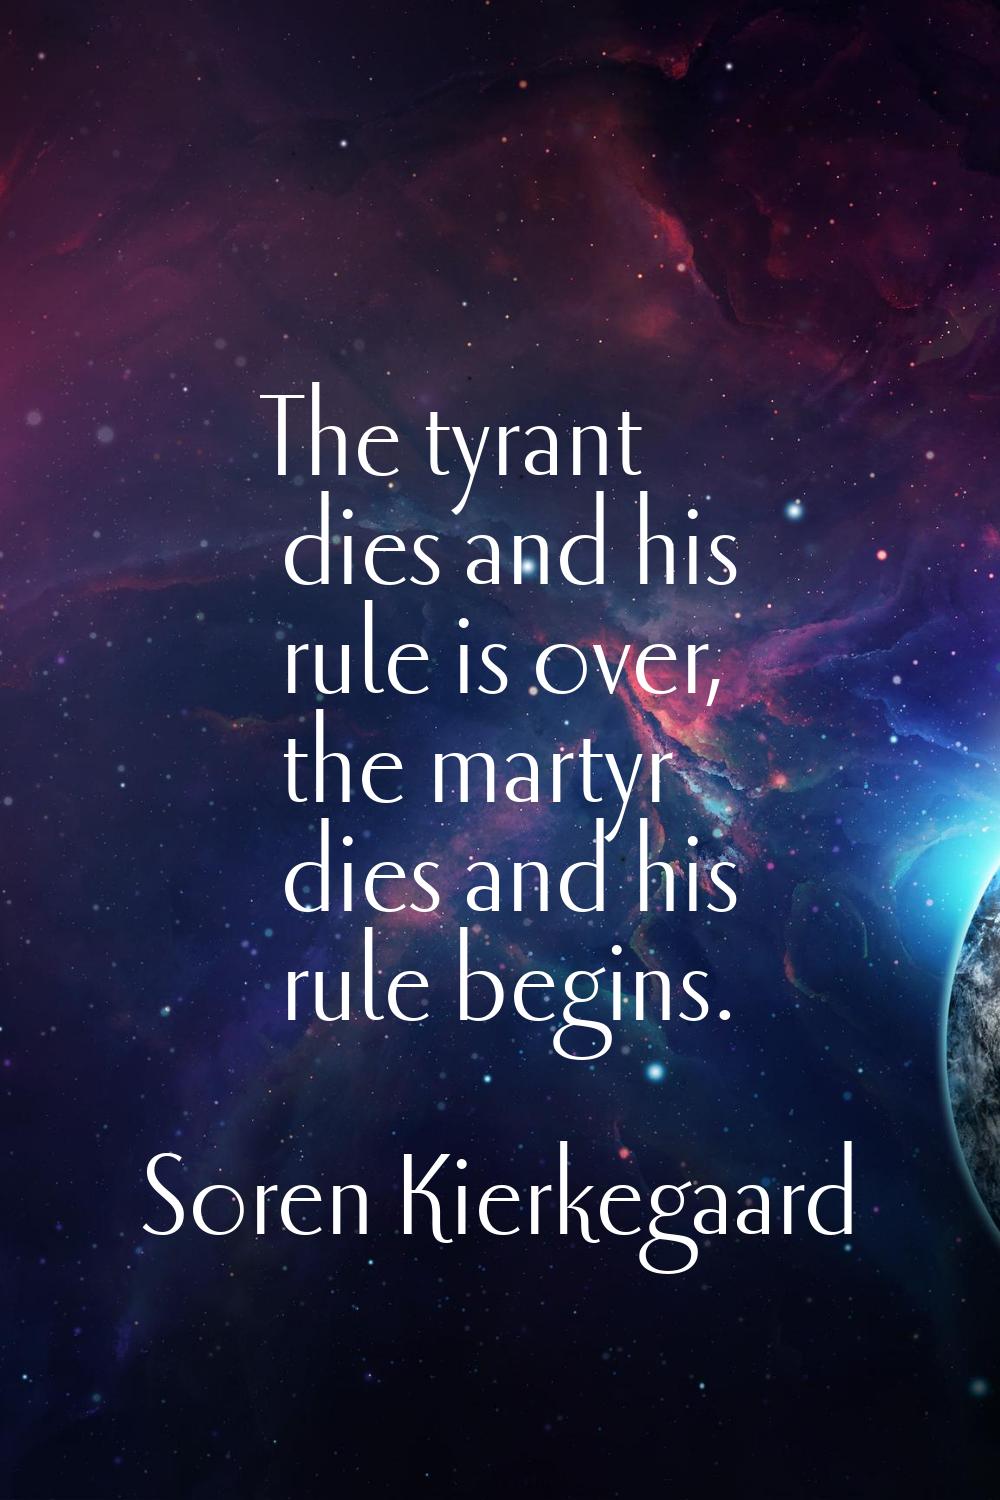 The tyrant dies and his rule is over, the martyr dies and his rule begins.